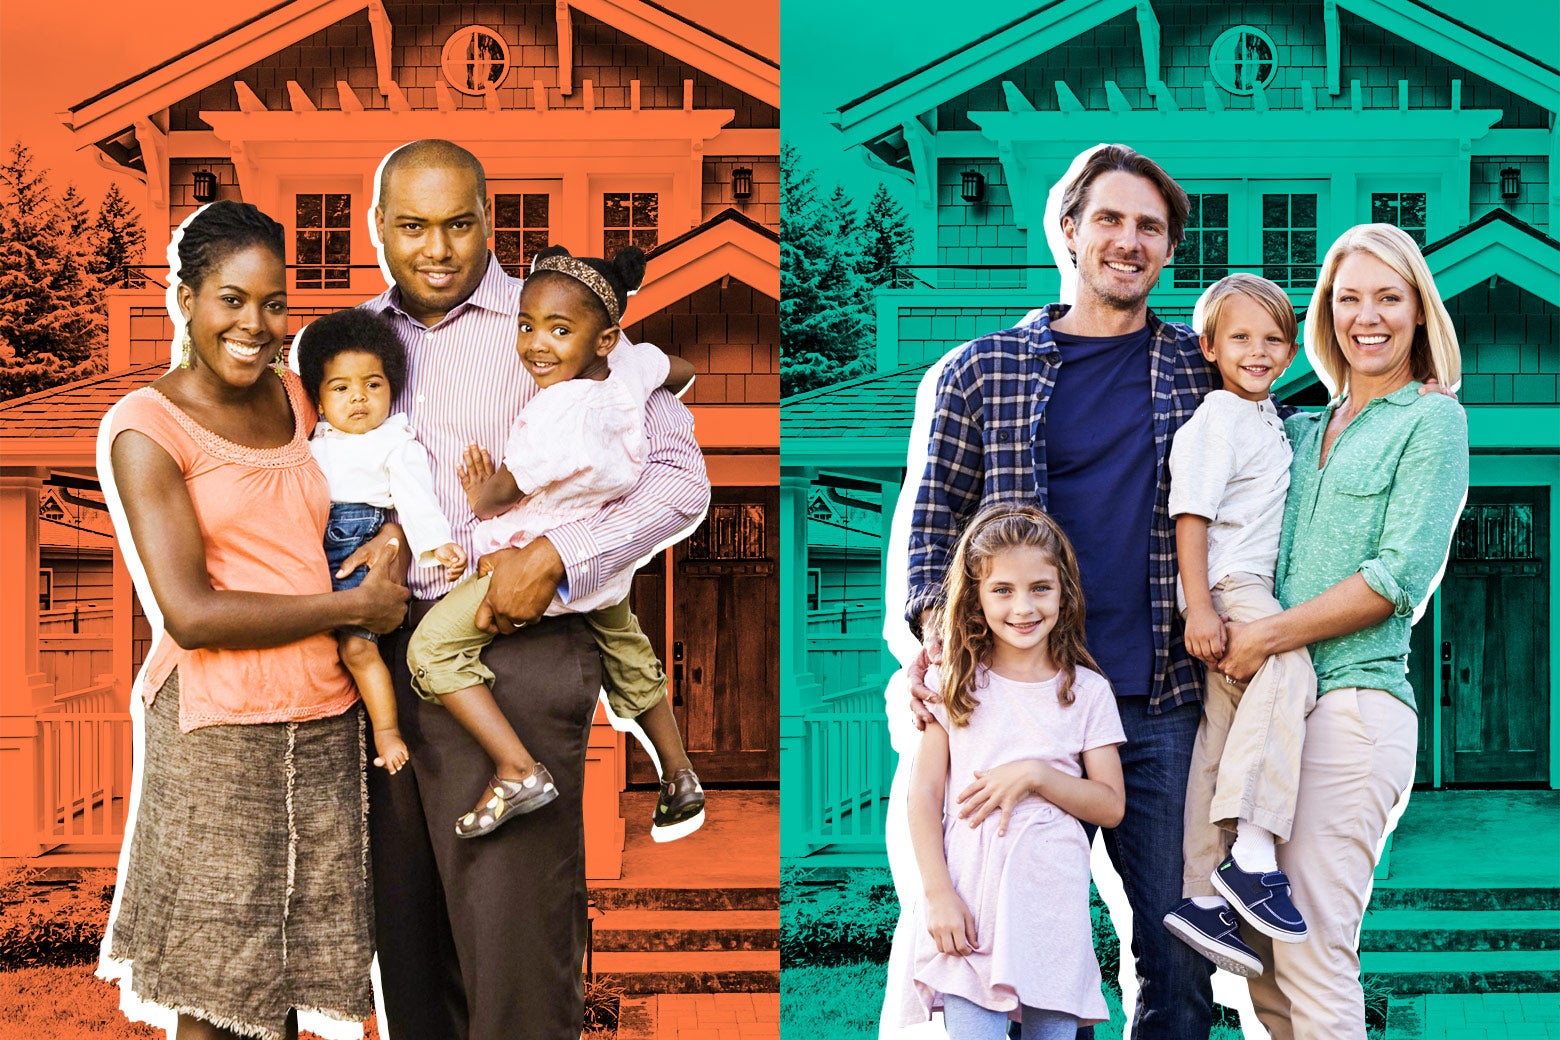 Diptych of a black family in front of a suburban house and a white family in front of the same suburban house.